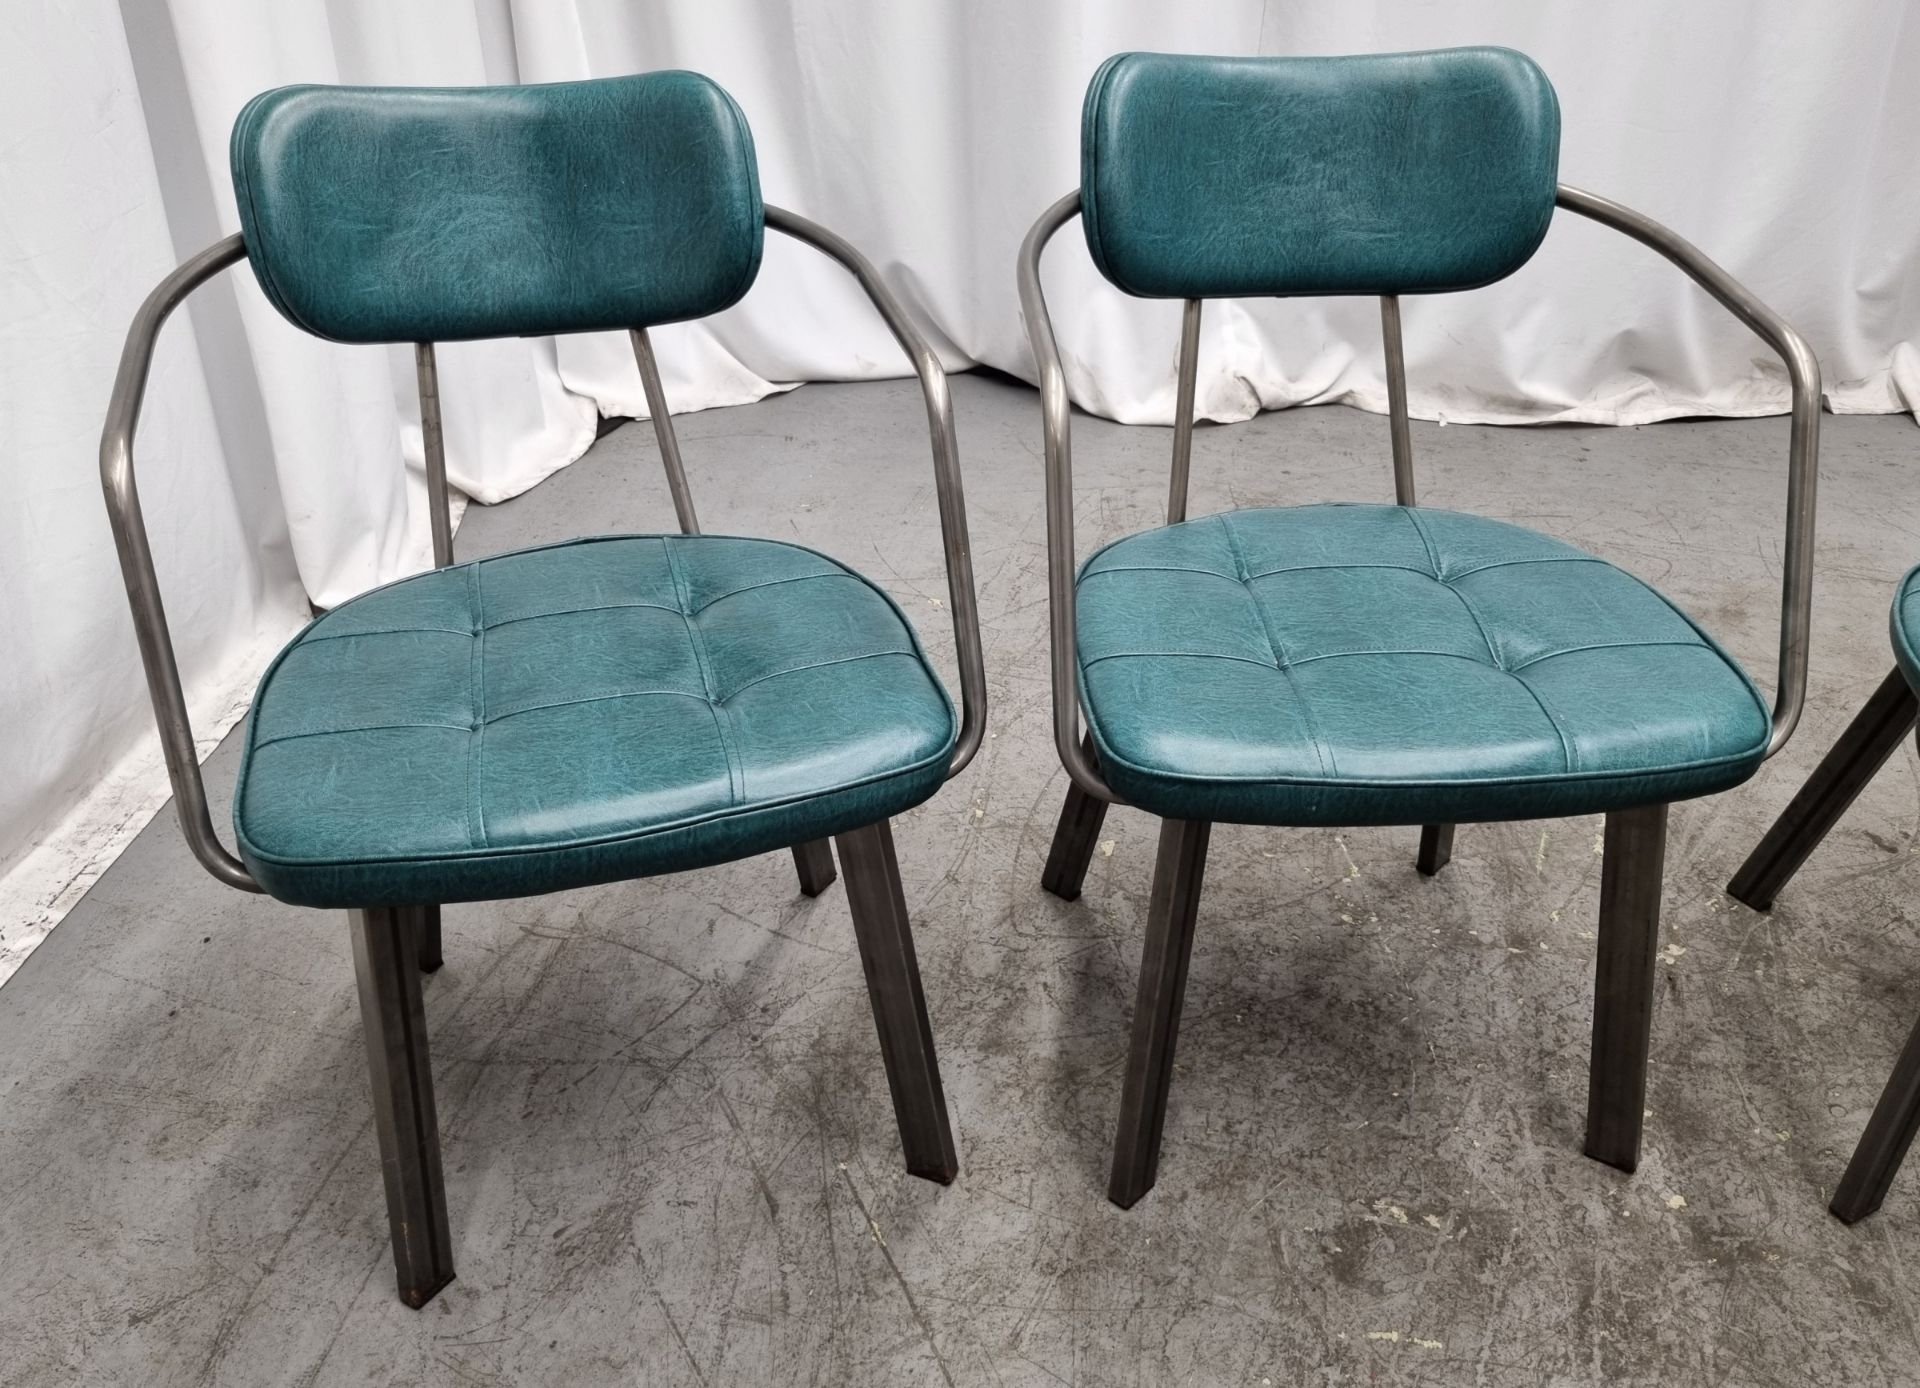 4x Industrial green leather restaurant chairs - L 550 x W 600 x H 80cm - Image 2 of 11